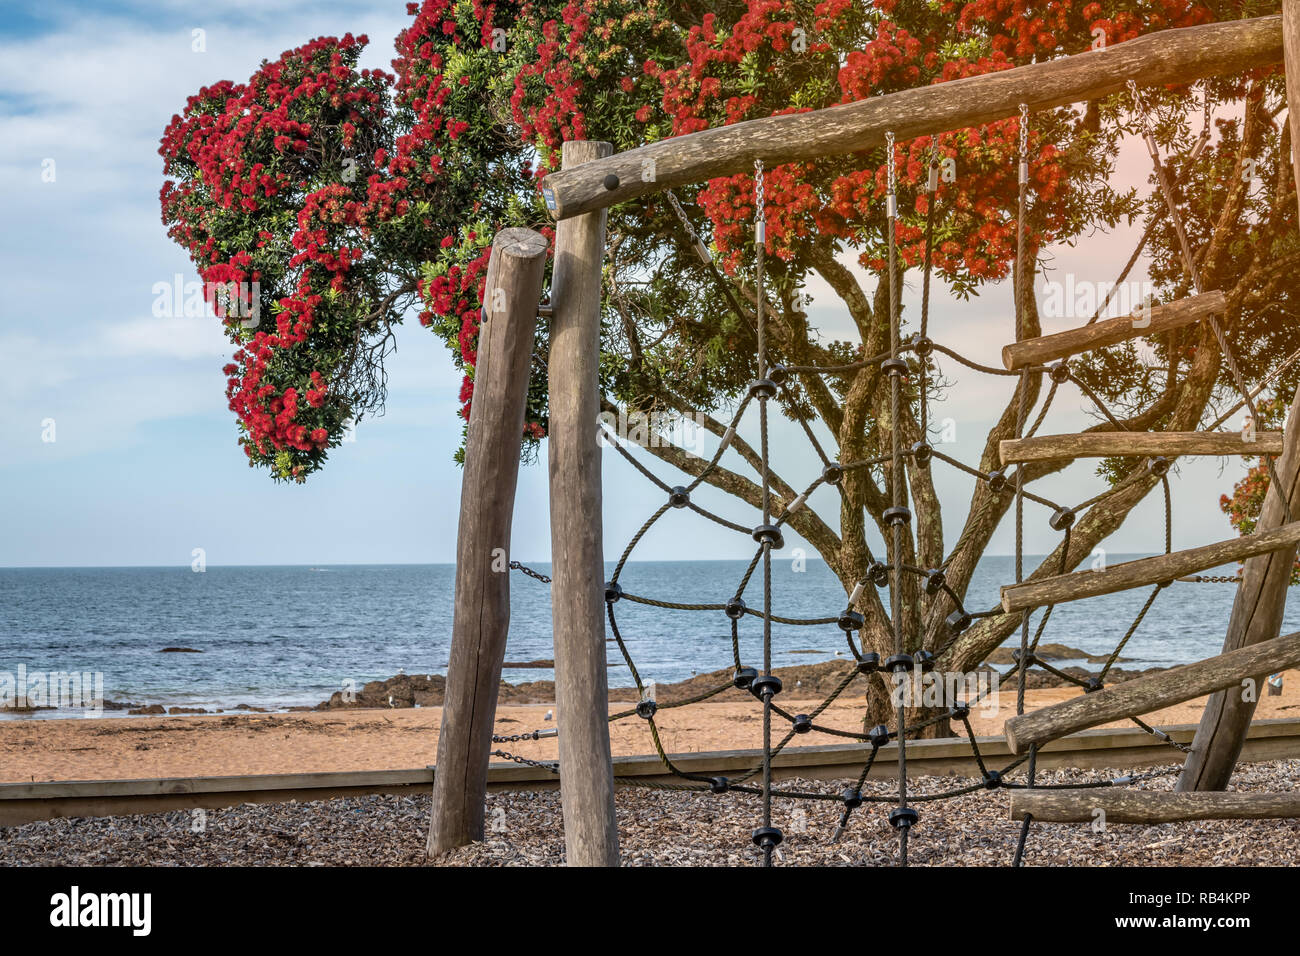 A playground by the beach with a beautiful blooming pohutukawa tree and the sea in the background Stock Photo